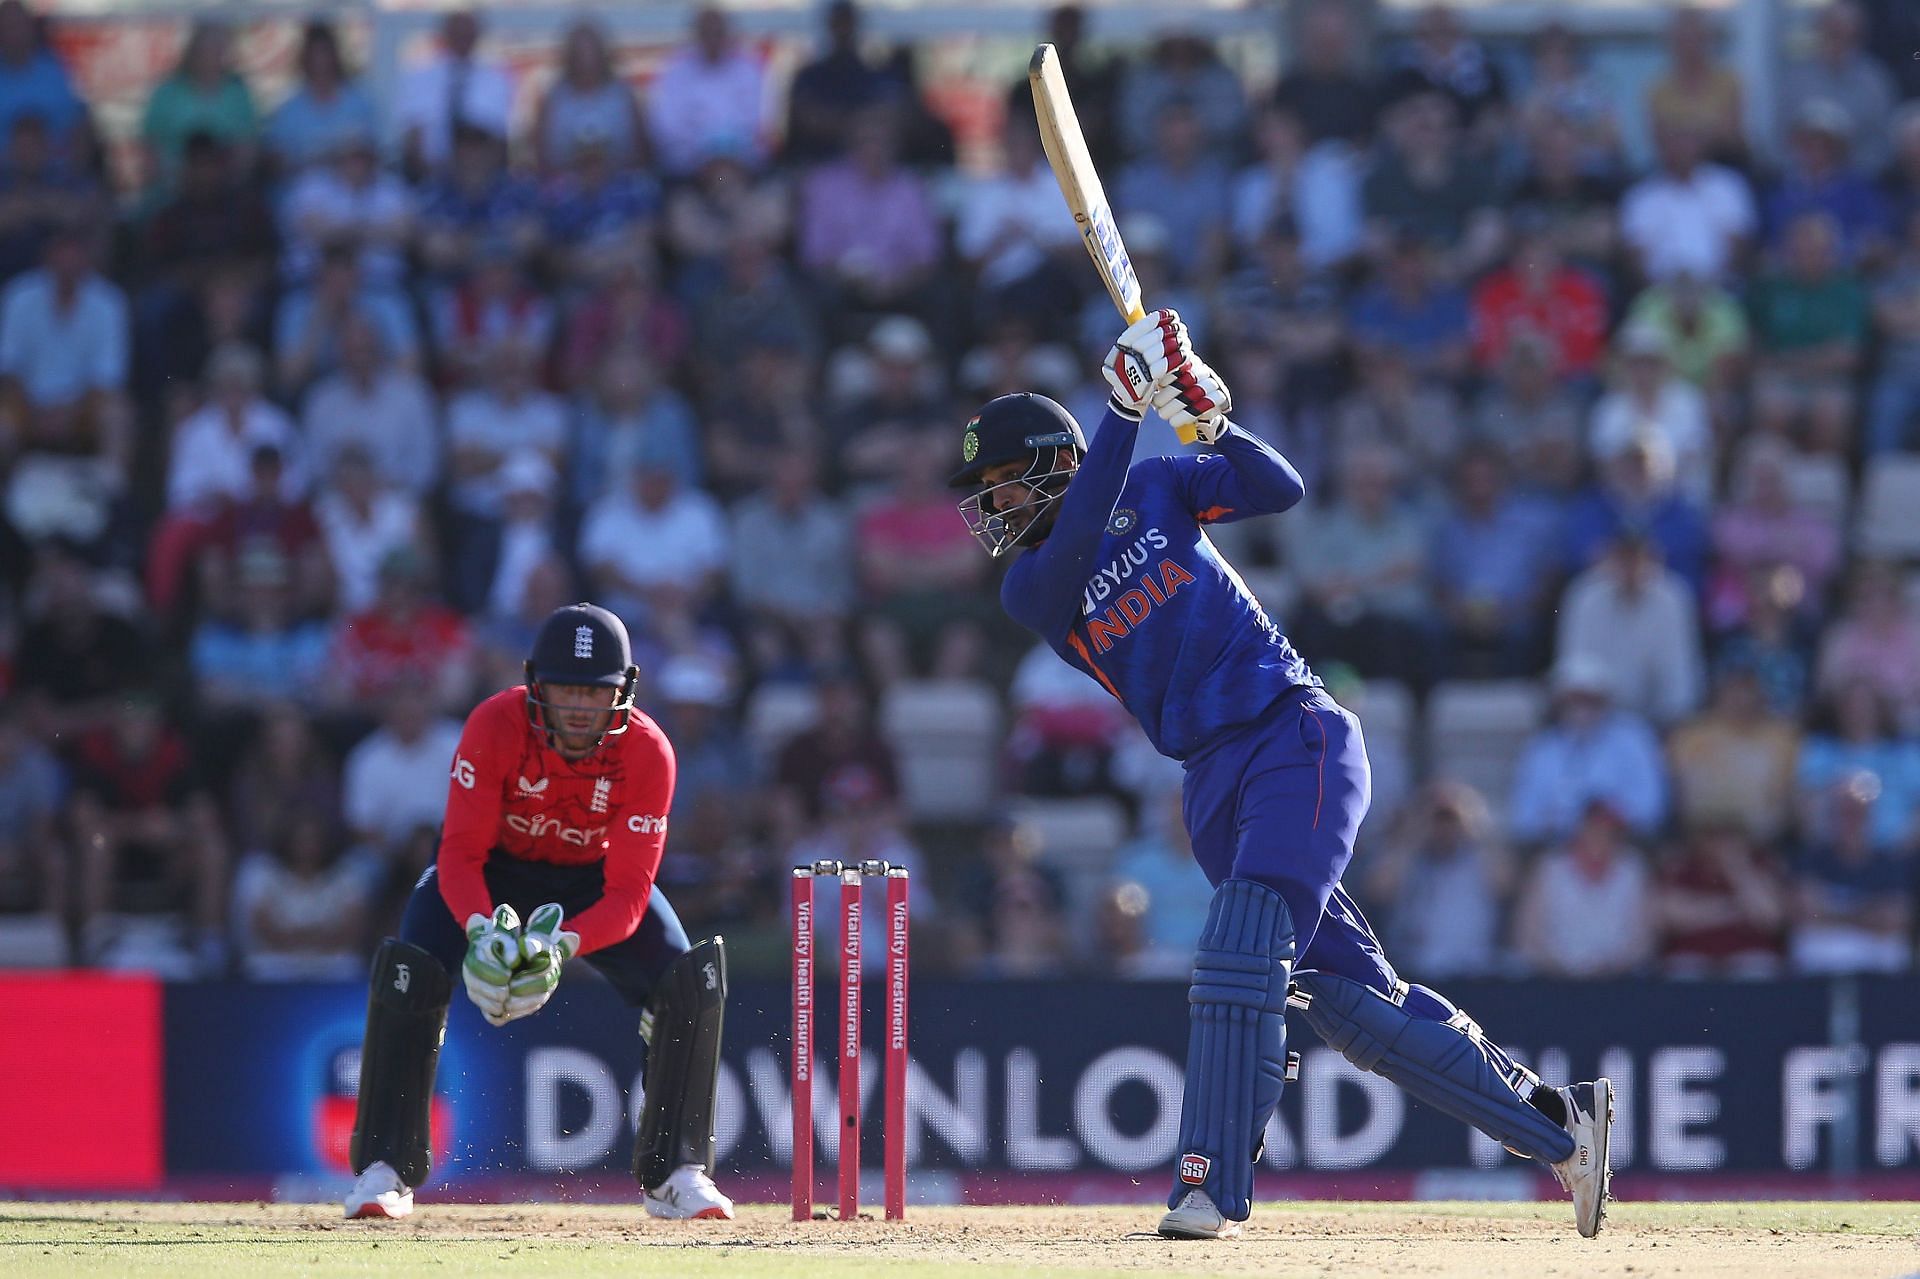 Deepak Hooda gave a decent account of himself in the first T20I against England